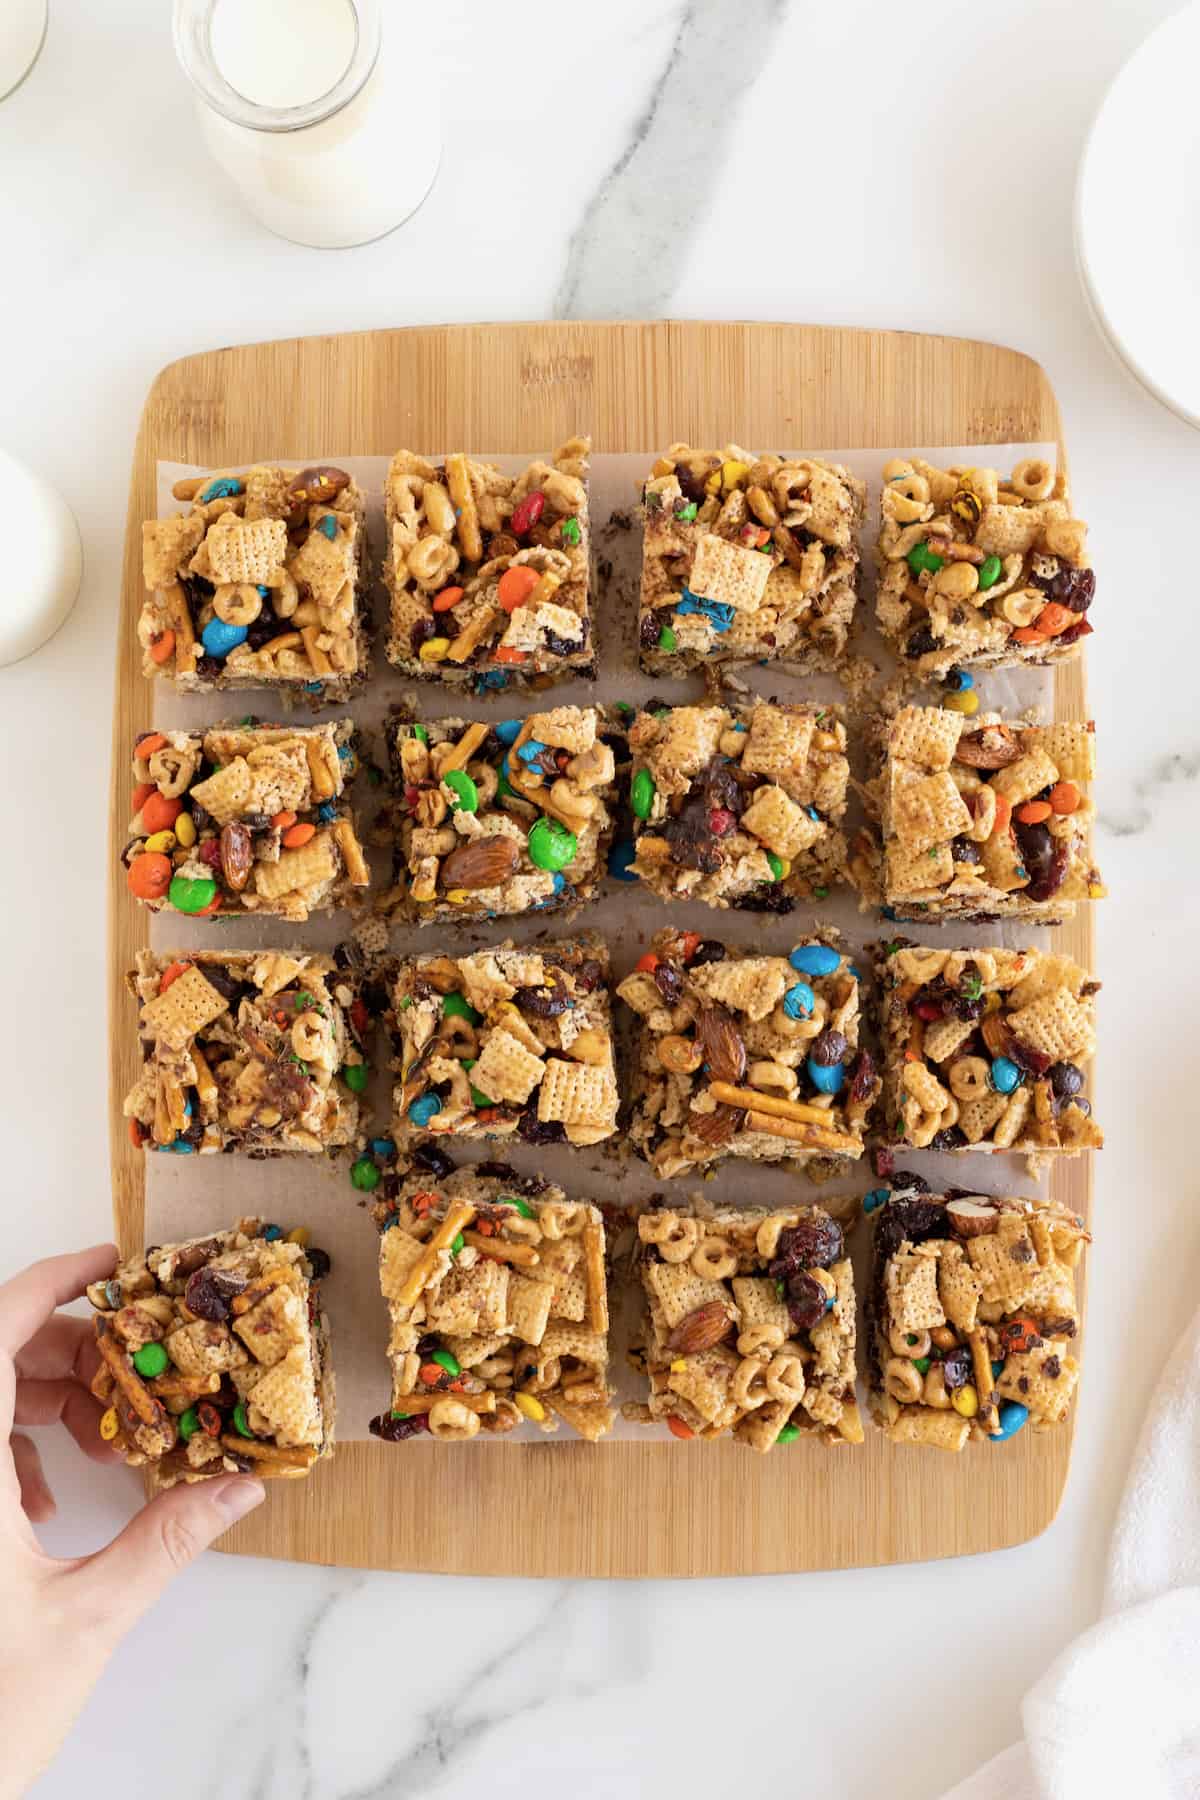 Snack bars made with cereal, pretzel sticks and M&M's on a wooden cutting board.